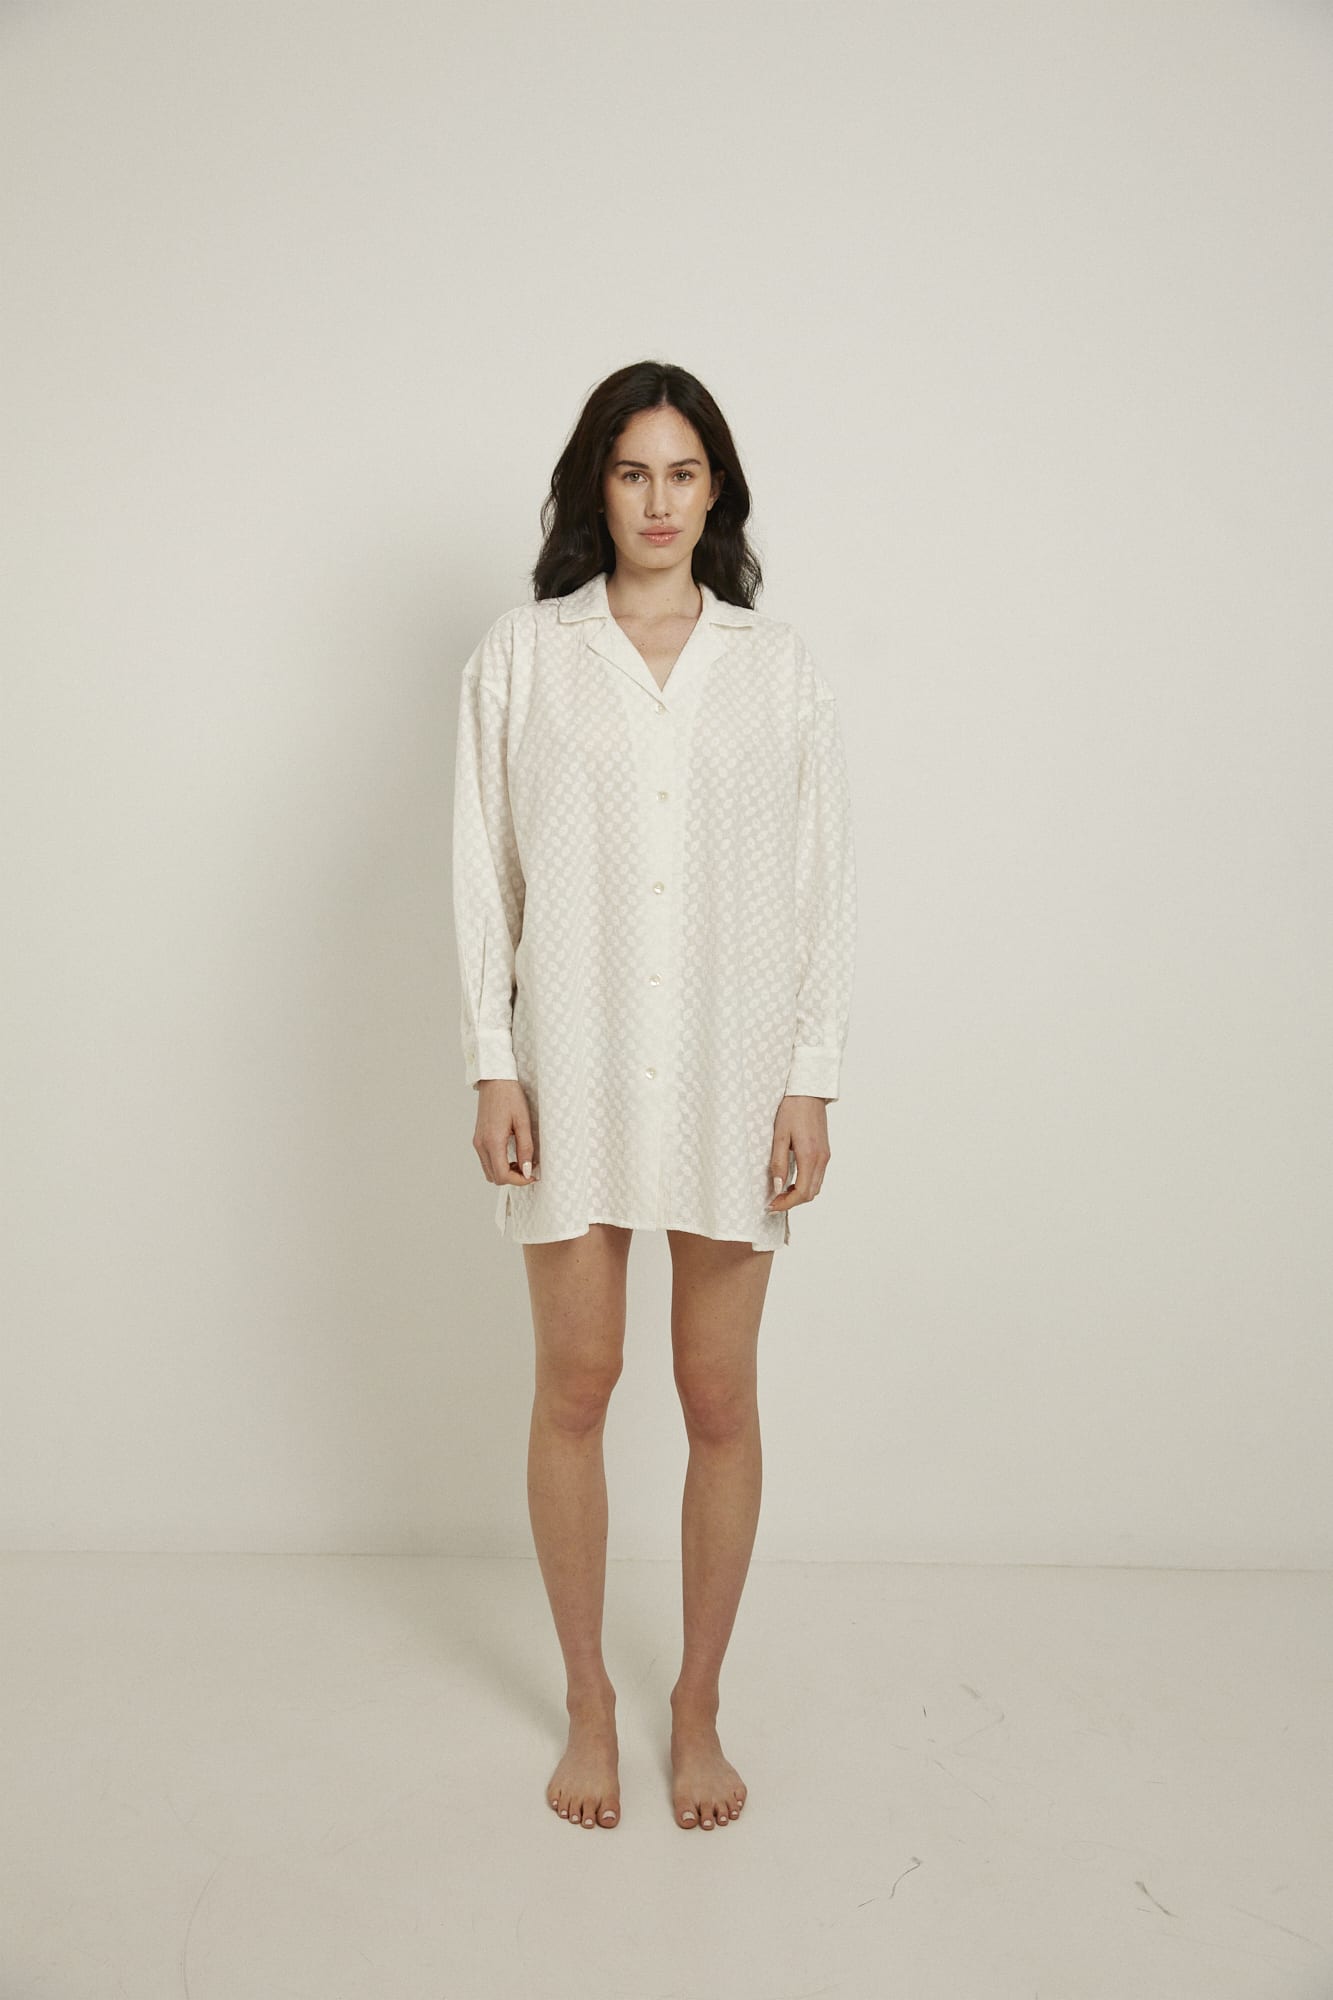 This knee length women’s nightdress dress has a boxy shape, with a comfortable dropped shoulder, and natural shell buttoned cuffs and placket.  Featuring a single breast pocket, back box pleat and locker loop detail, this shirt is finished with French seams. In white, and made from 100% organic cotton, this shirt is delicately embroidered all over.  